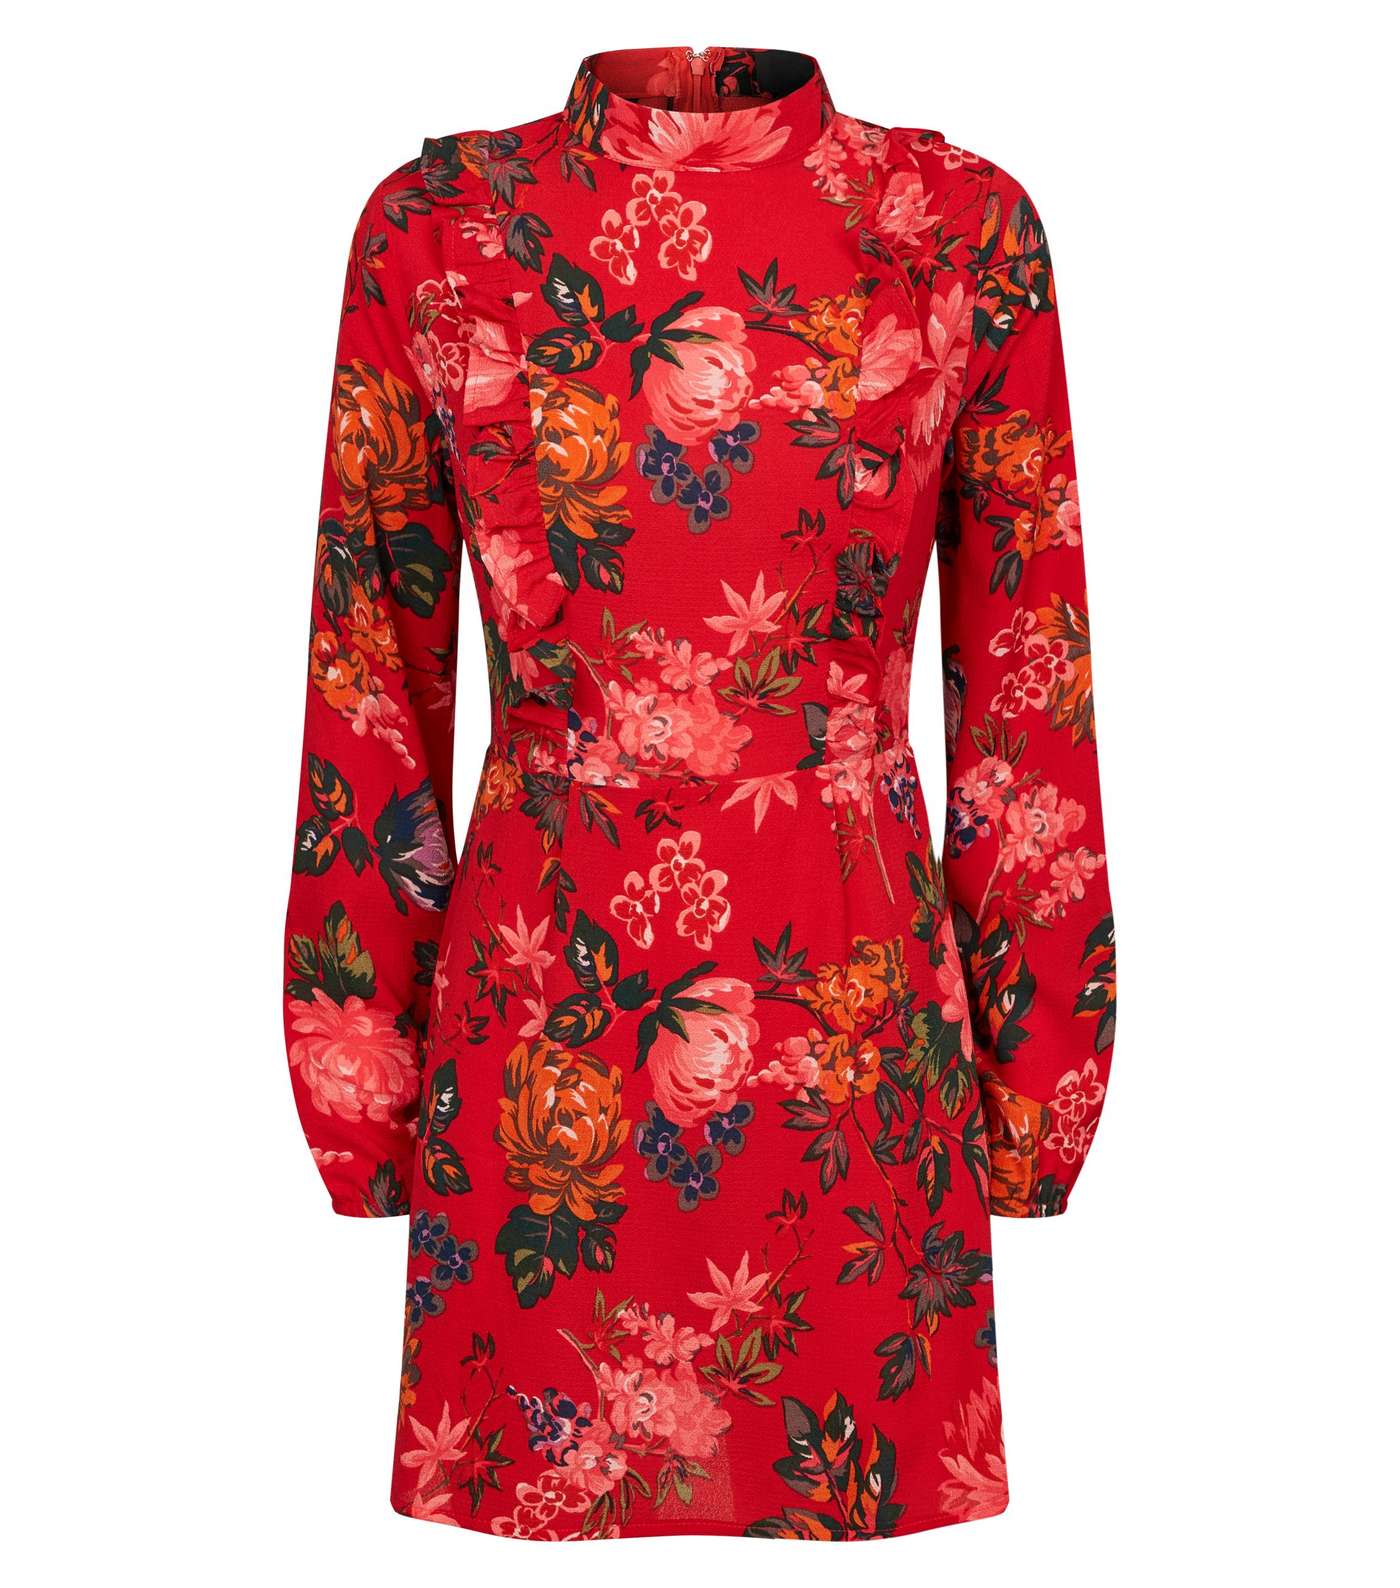 AX Paris Red Floral Print Frill Front Dress Image 4